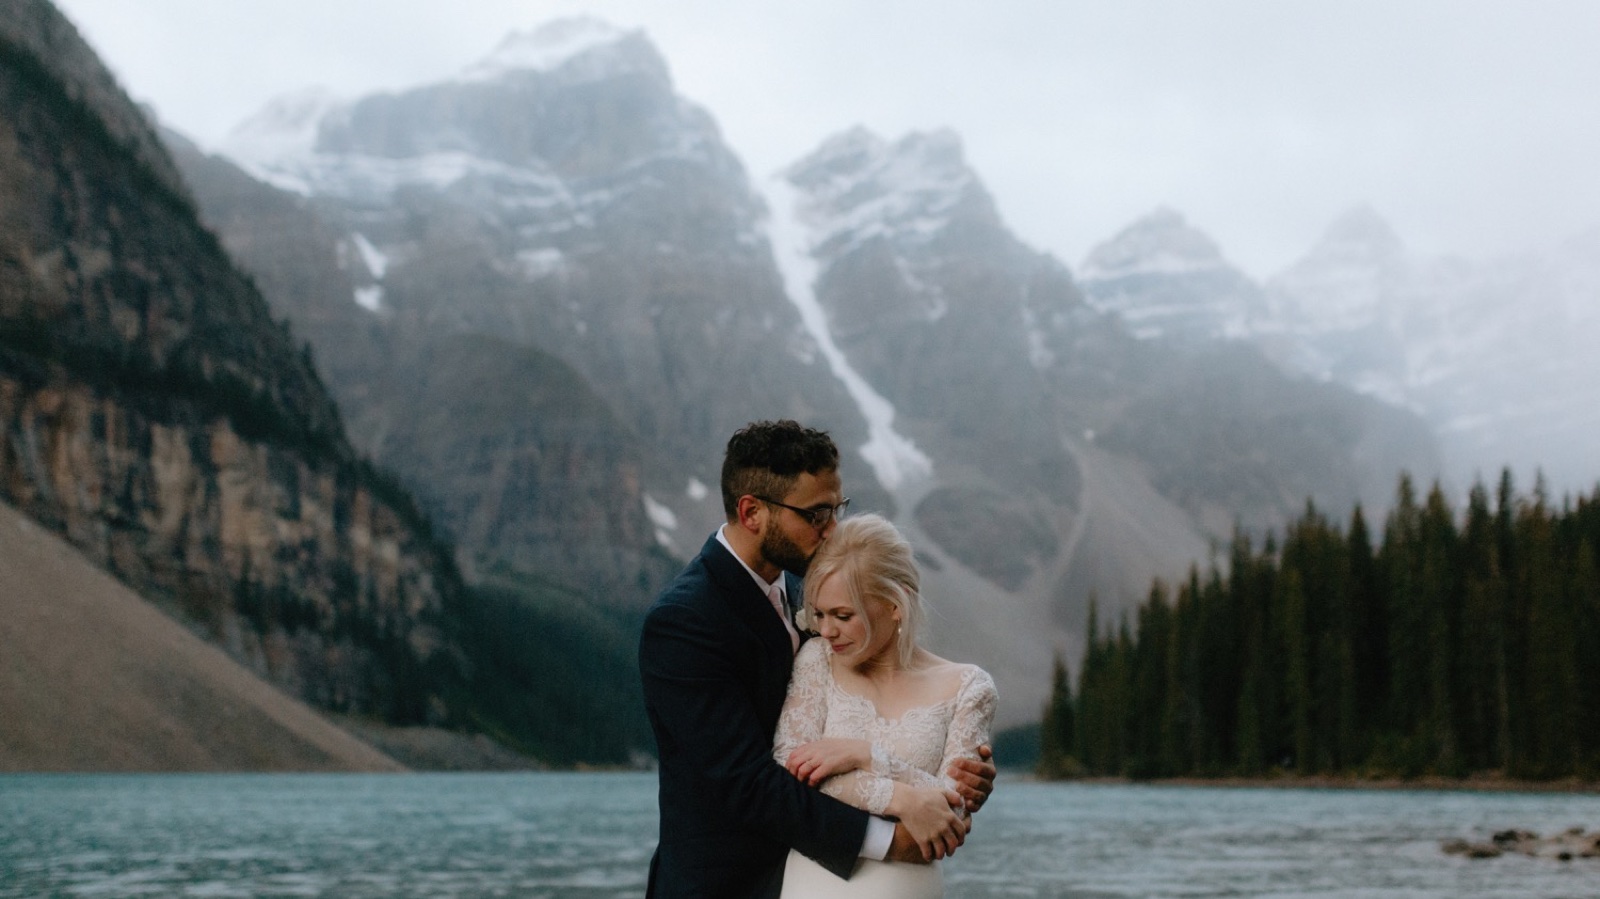 Autumn wedding portraits at Moraine Lake on a blustery winter day